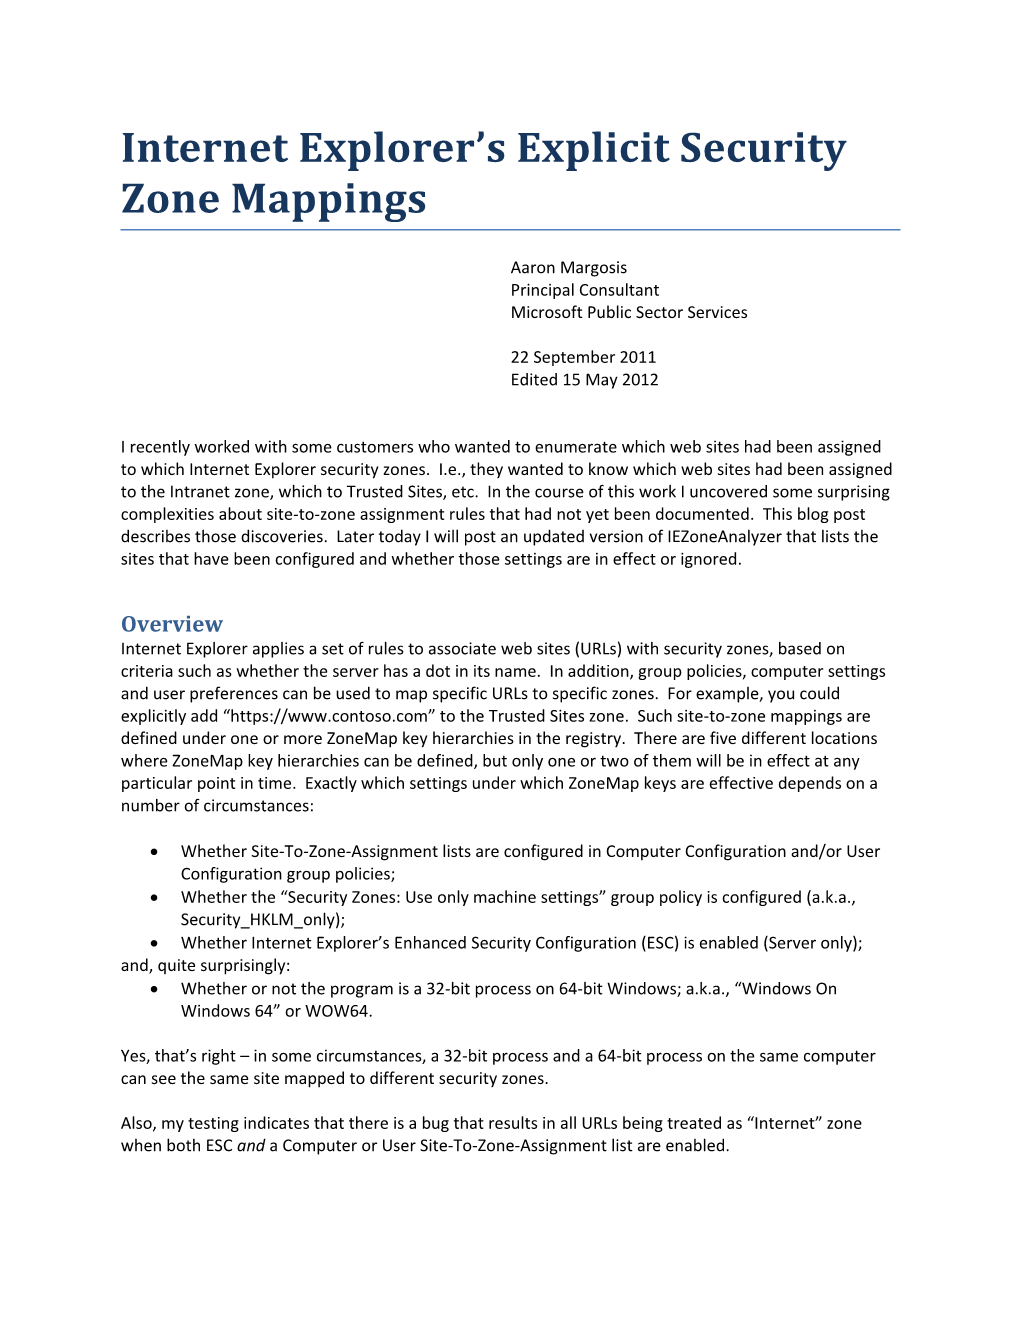 Internet Explorer's Explicit Security Zone Mappings